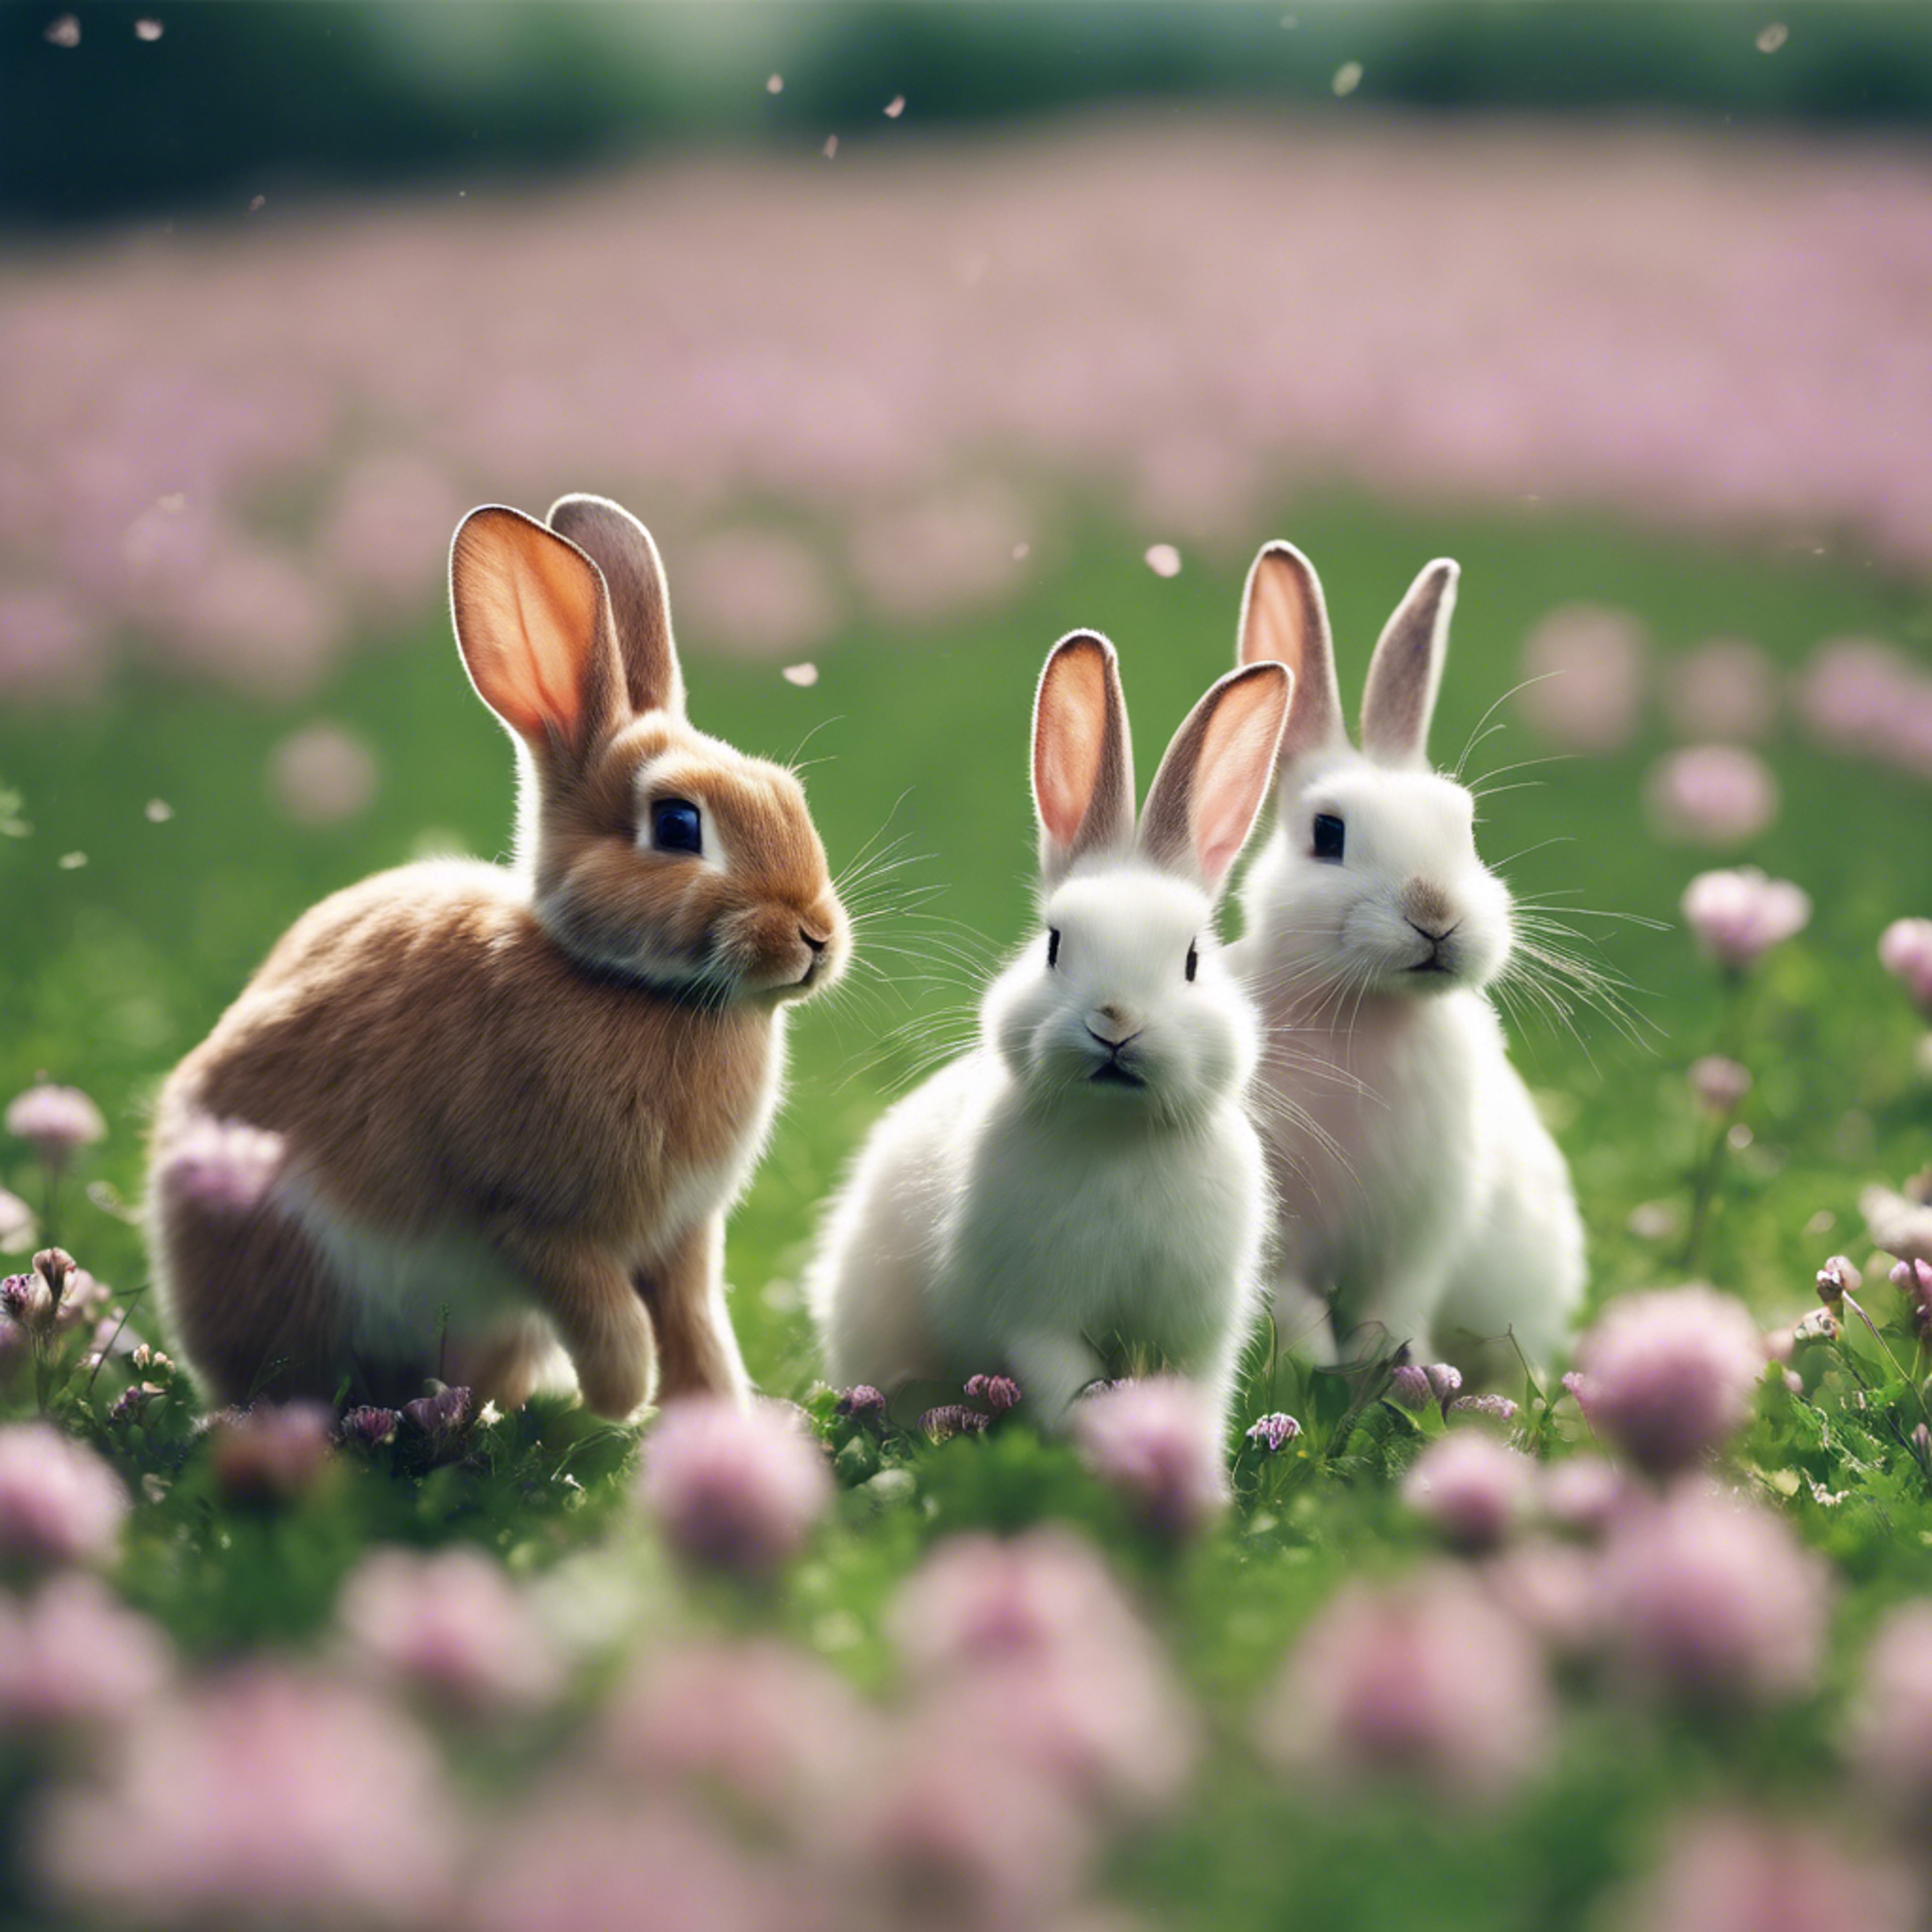 A group of rabbits playing tag in a clover field.壁紙[610eb32603614430a4af]